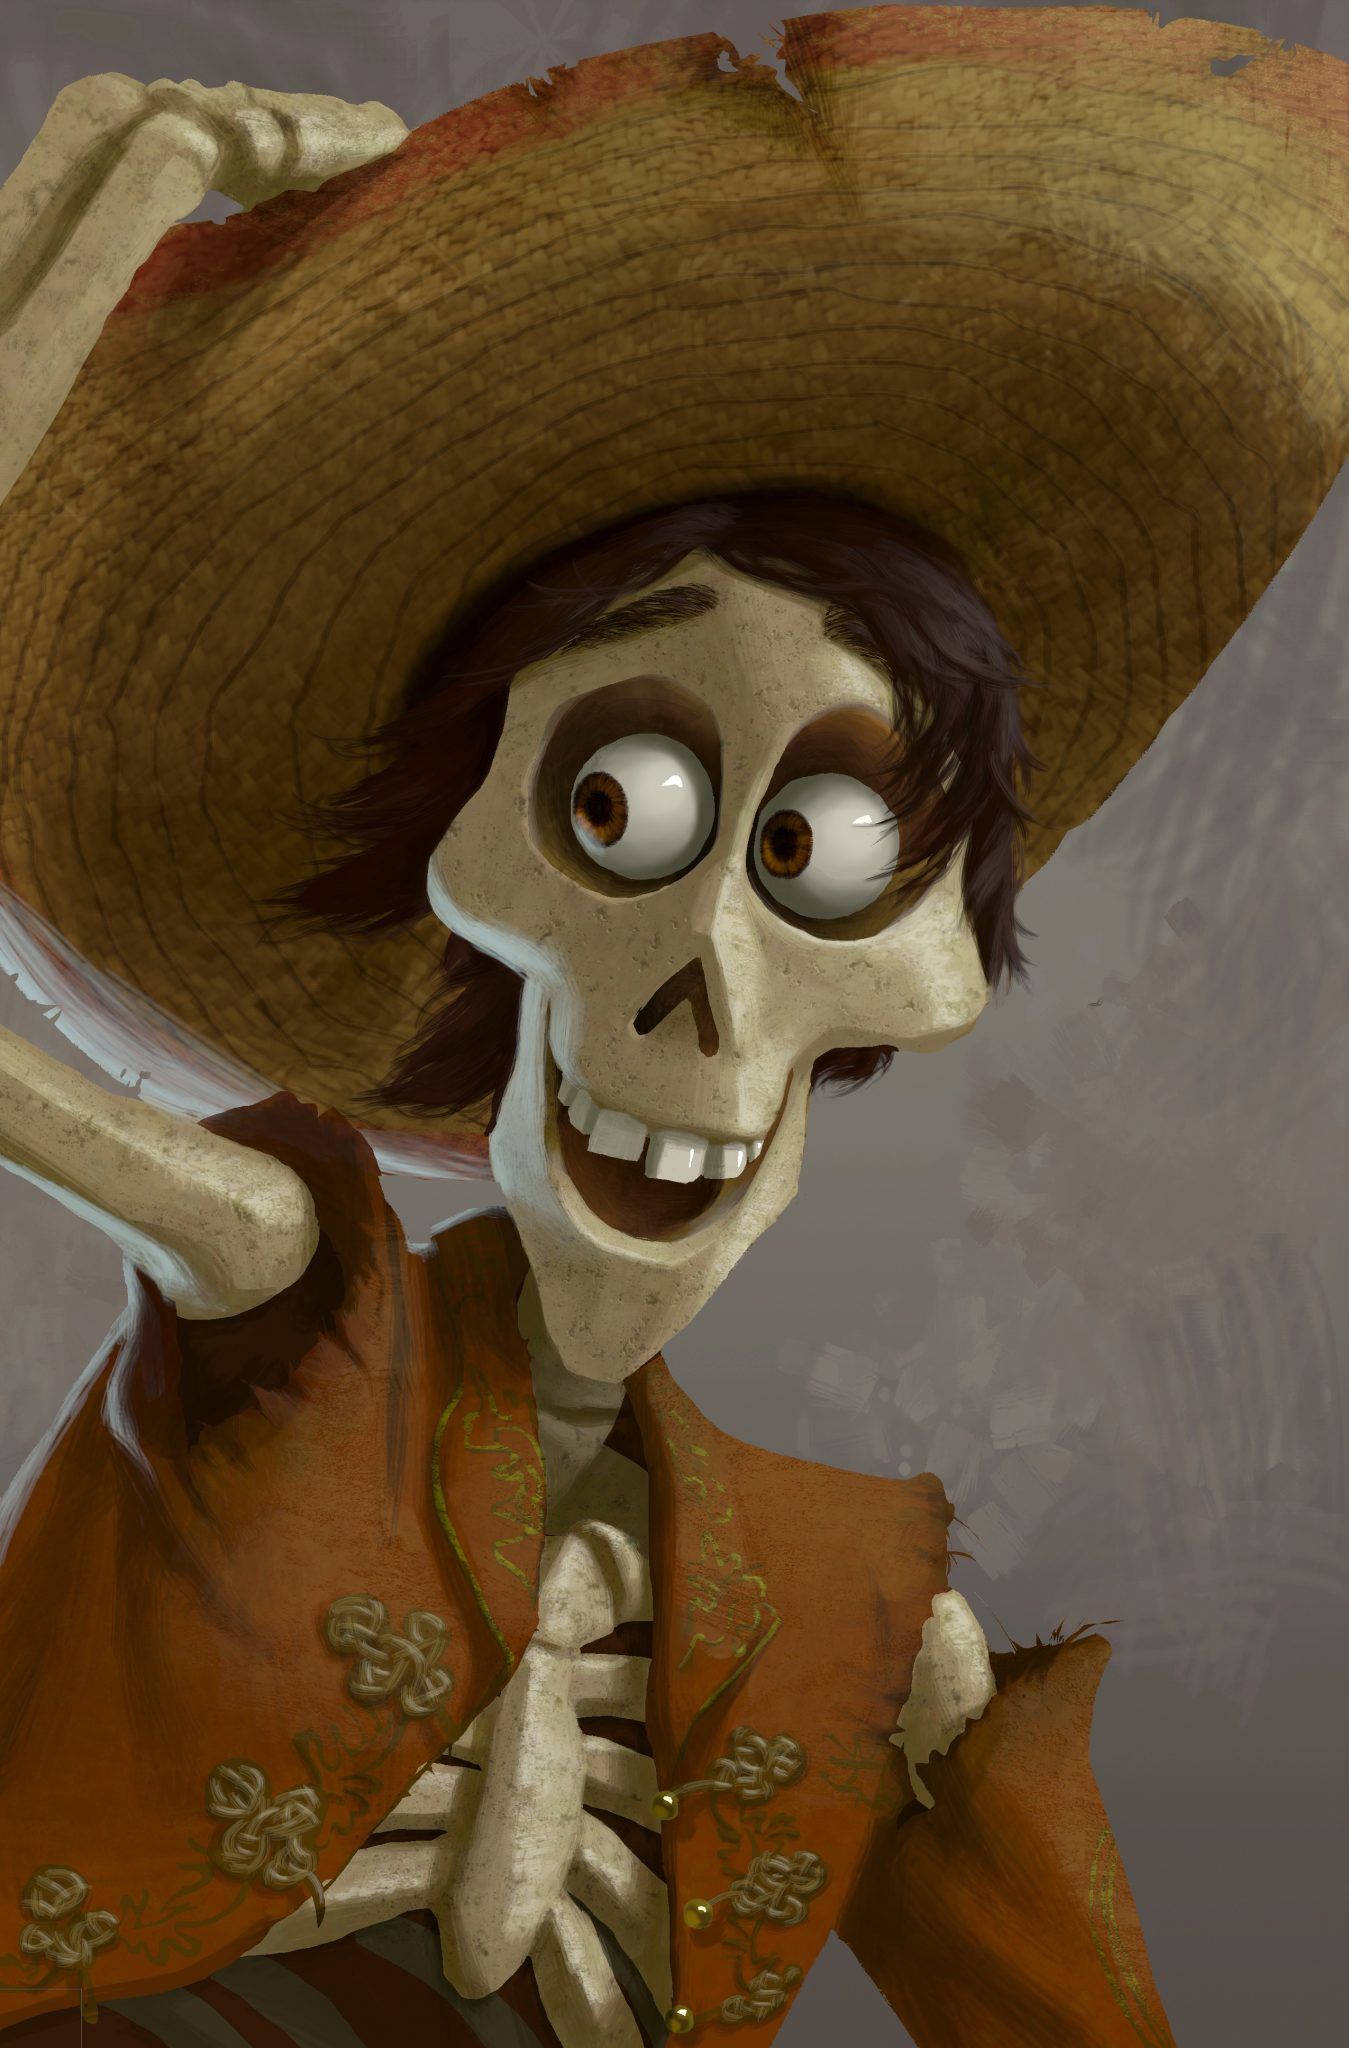 How Do They Bring the Skeletons to Life in Coco #PixarCOCOEvent. Animation, Disney pixar, Disney art